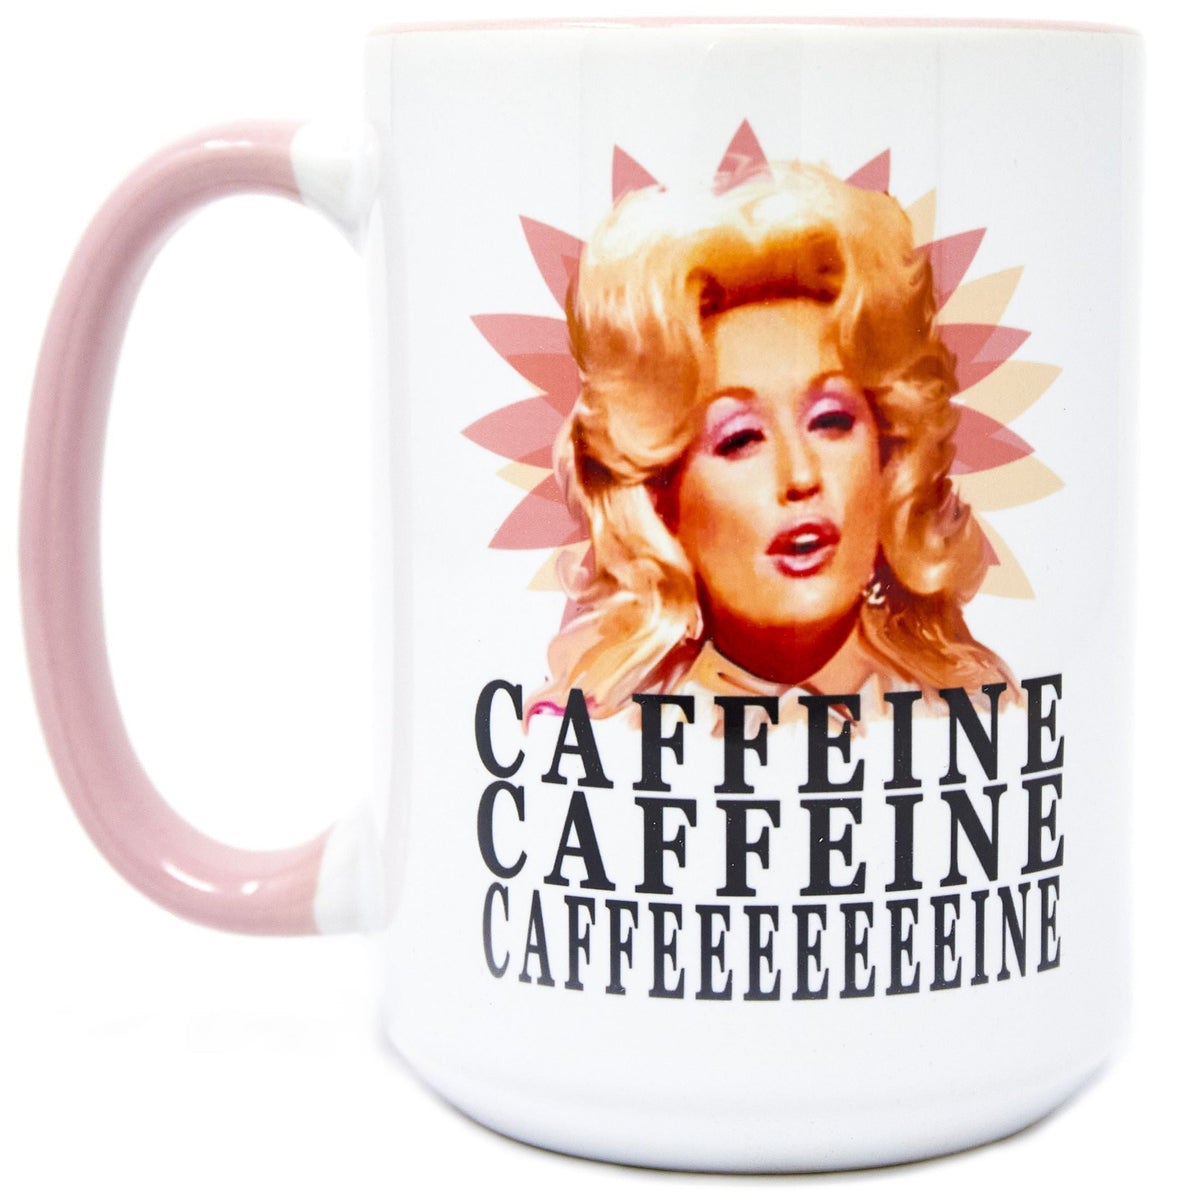 pink and white mug with dolly's face and the text 